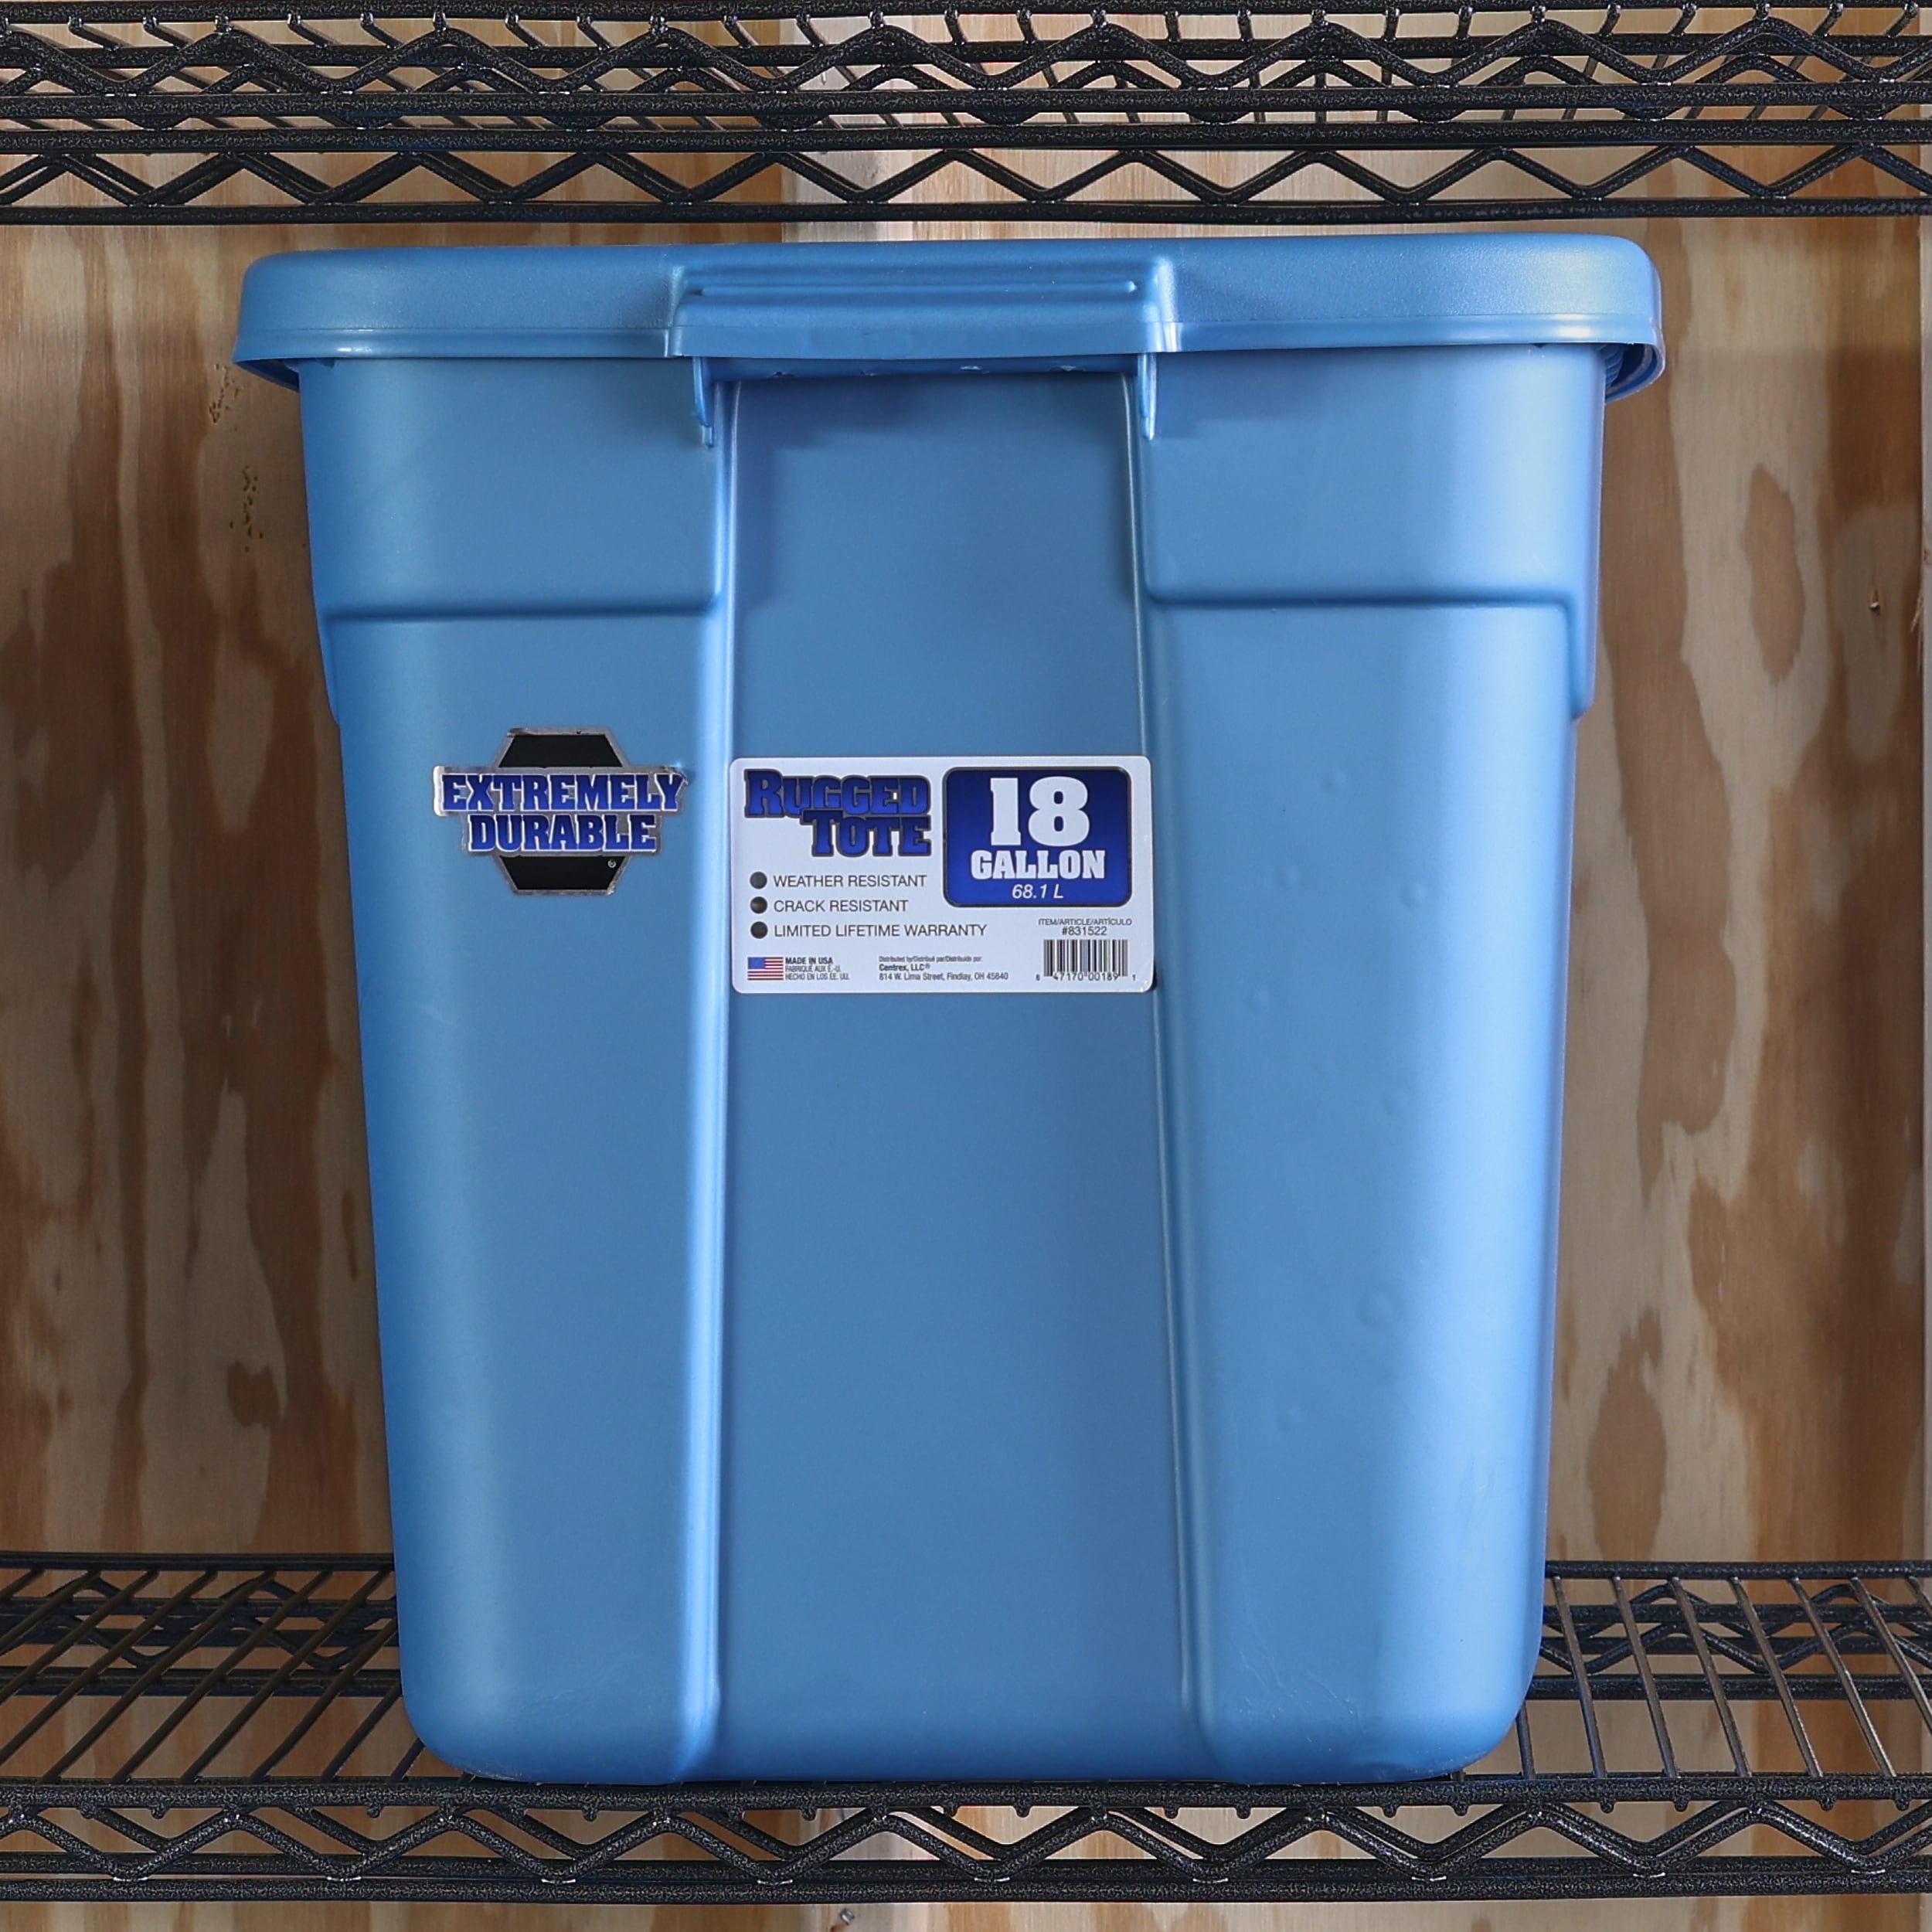 Centrex Rugged Tote Medium 18-Gallons (72-Quart) Metallic Blue Heavy Duty  Tote with Standard Snap Lid in the Plastic Storage Containers department at